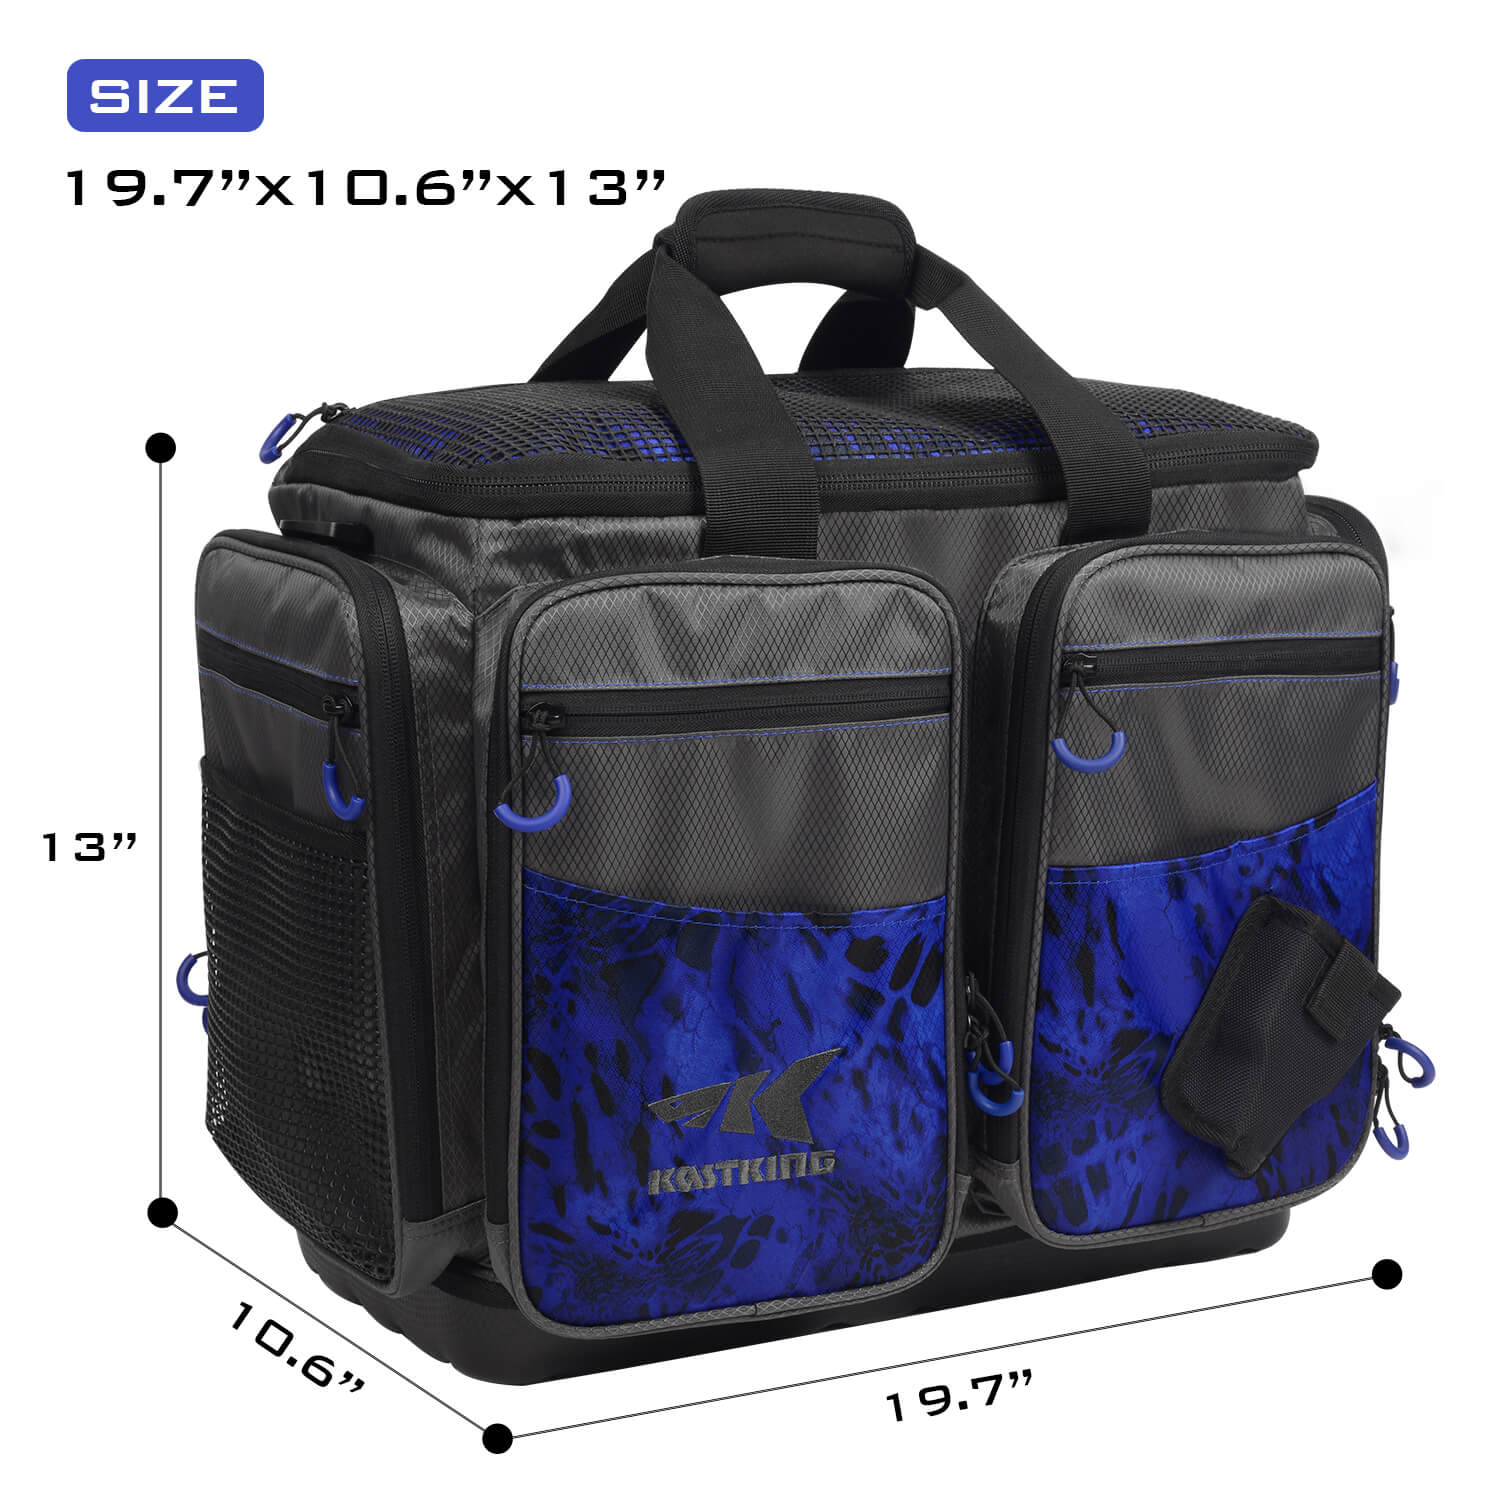 Fishing Reel Gear Bag Portable Fishing Tackle Organizer Storage Bag Reel  Case for Spinning Baitcasting Fly Reels Water-Resistant Fishing Tackle Bags